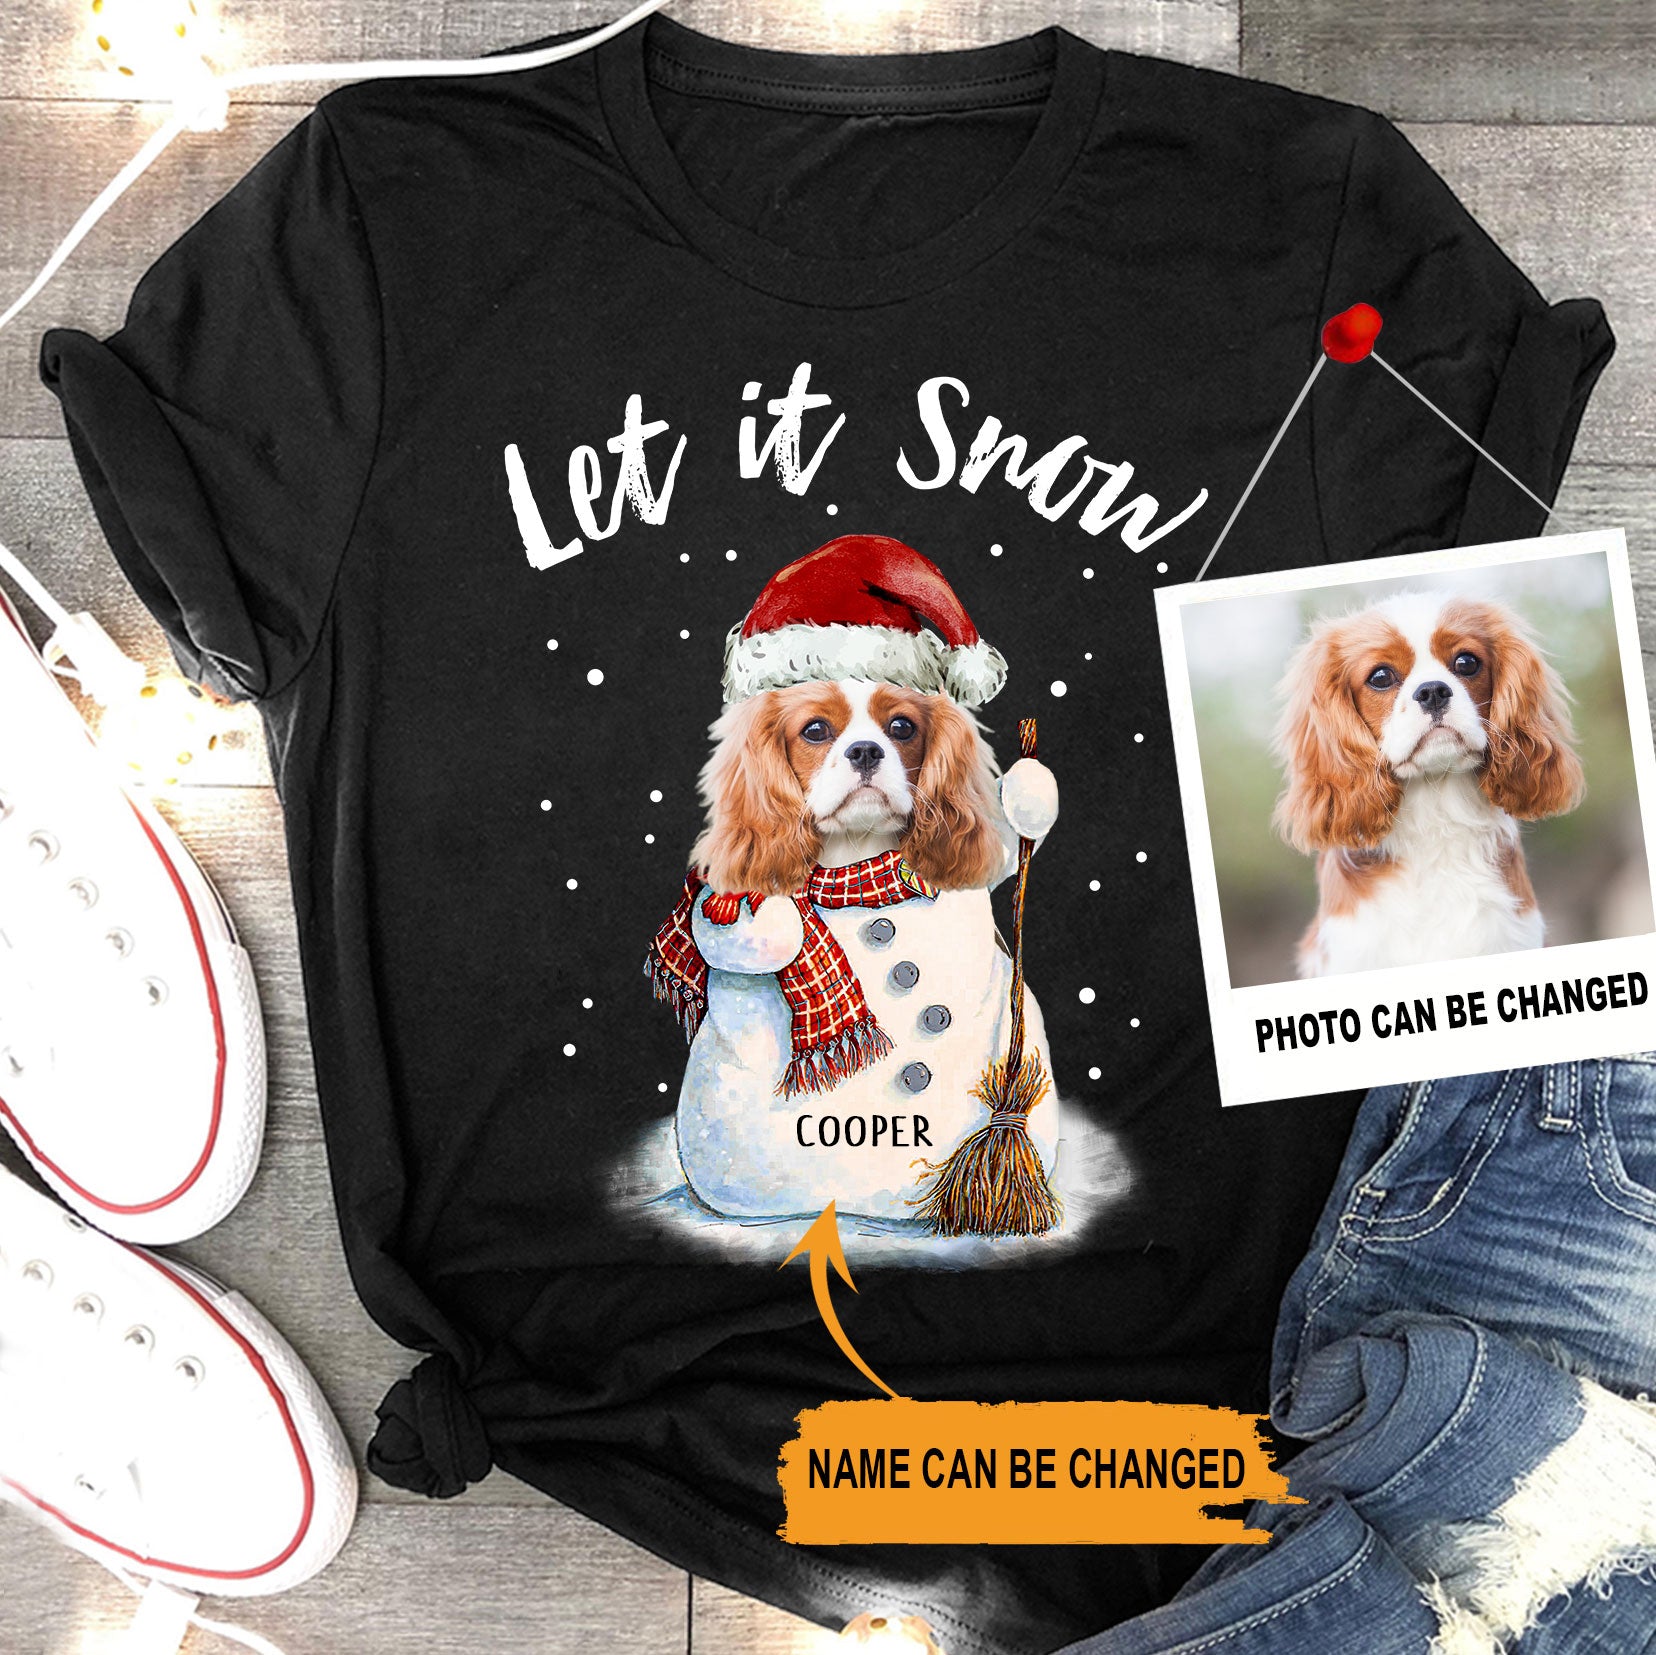 Custom Dog Christmas Funny Outfit, Let It Snow Personalized Dog Shirt Sweatshirt Hoodie, Gift For Dog Lovers, Friend, Family